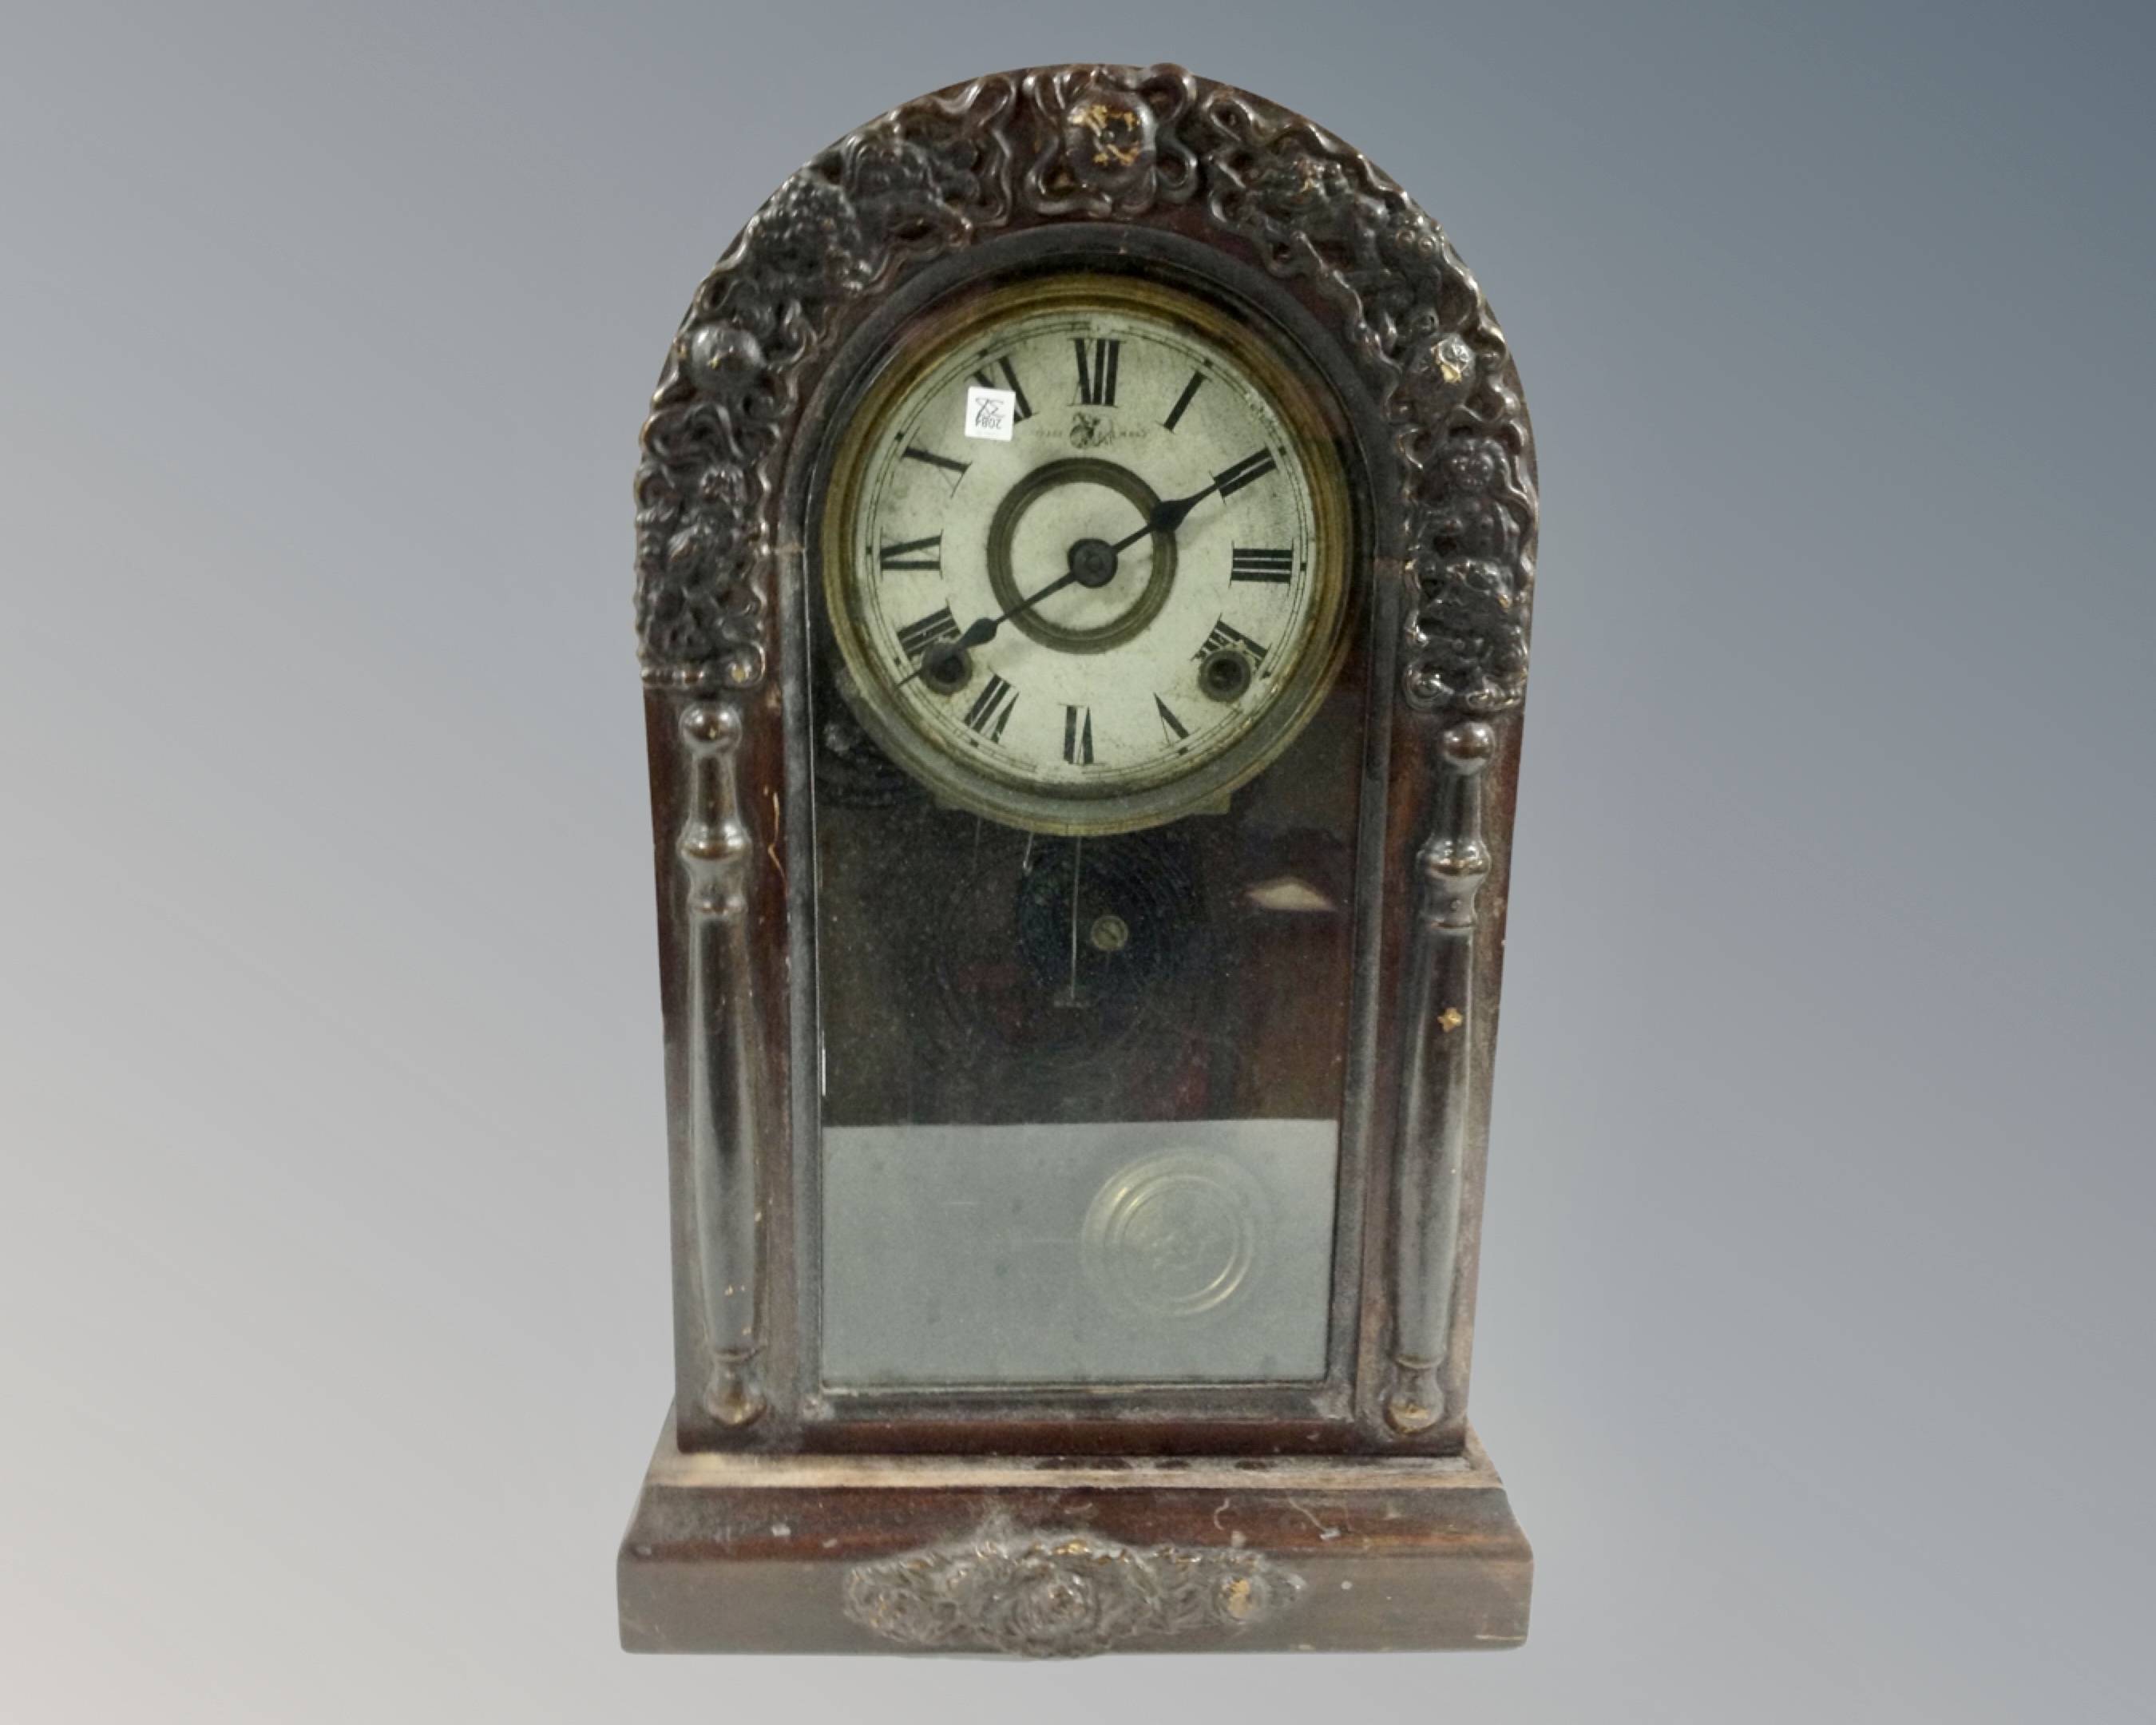 An early 20th century Japanese domed topped mantel clock